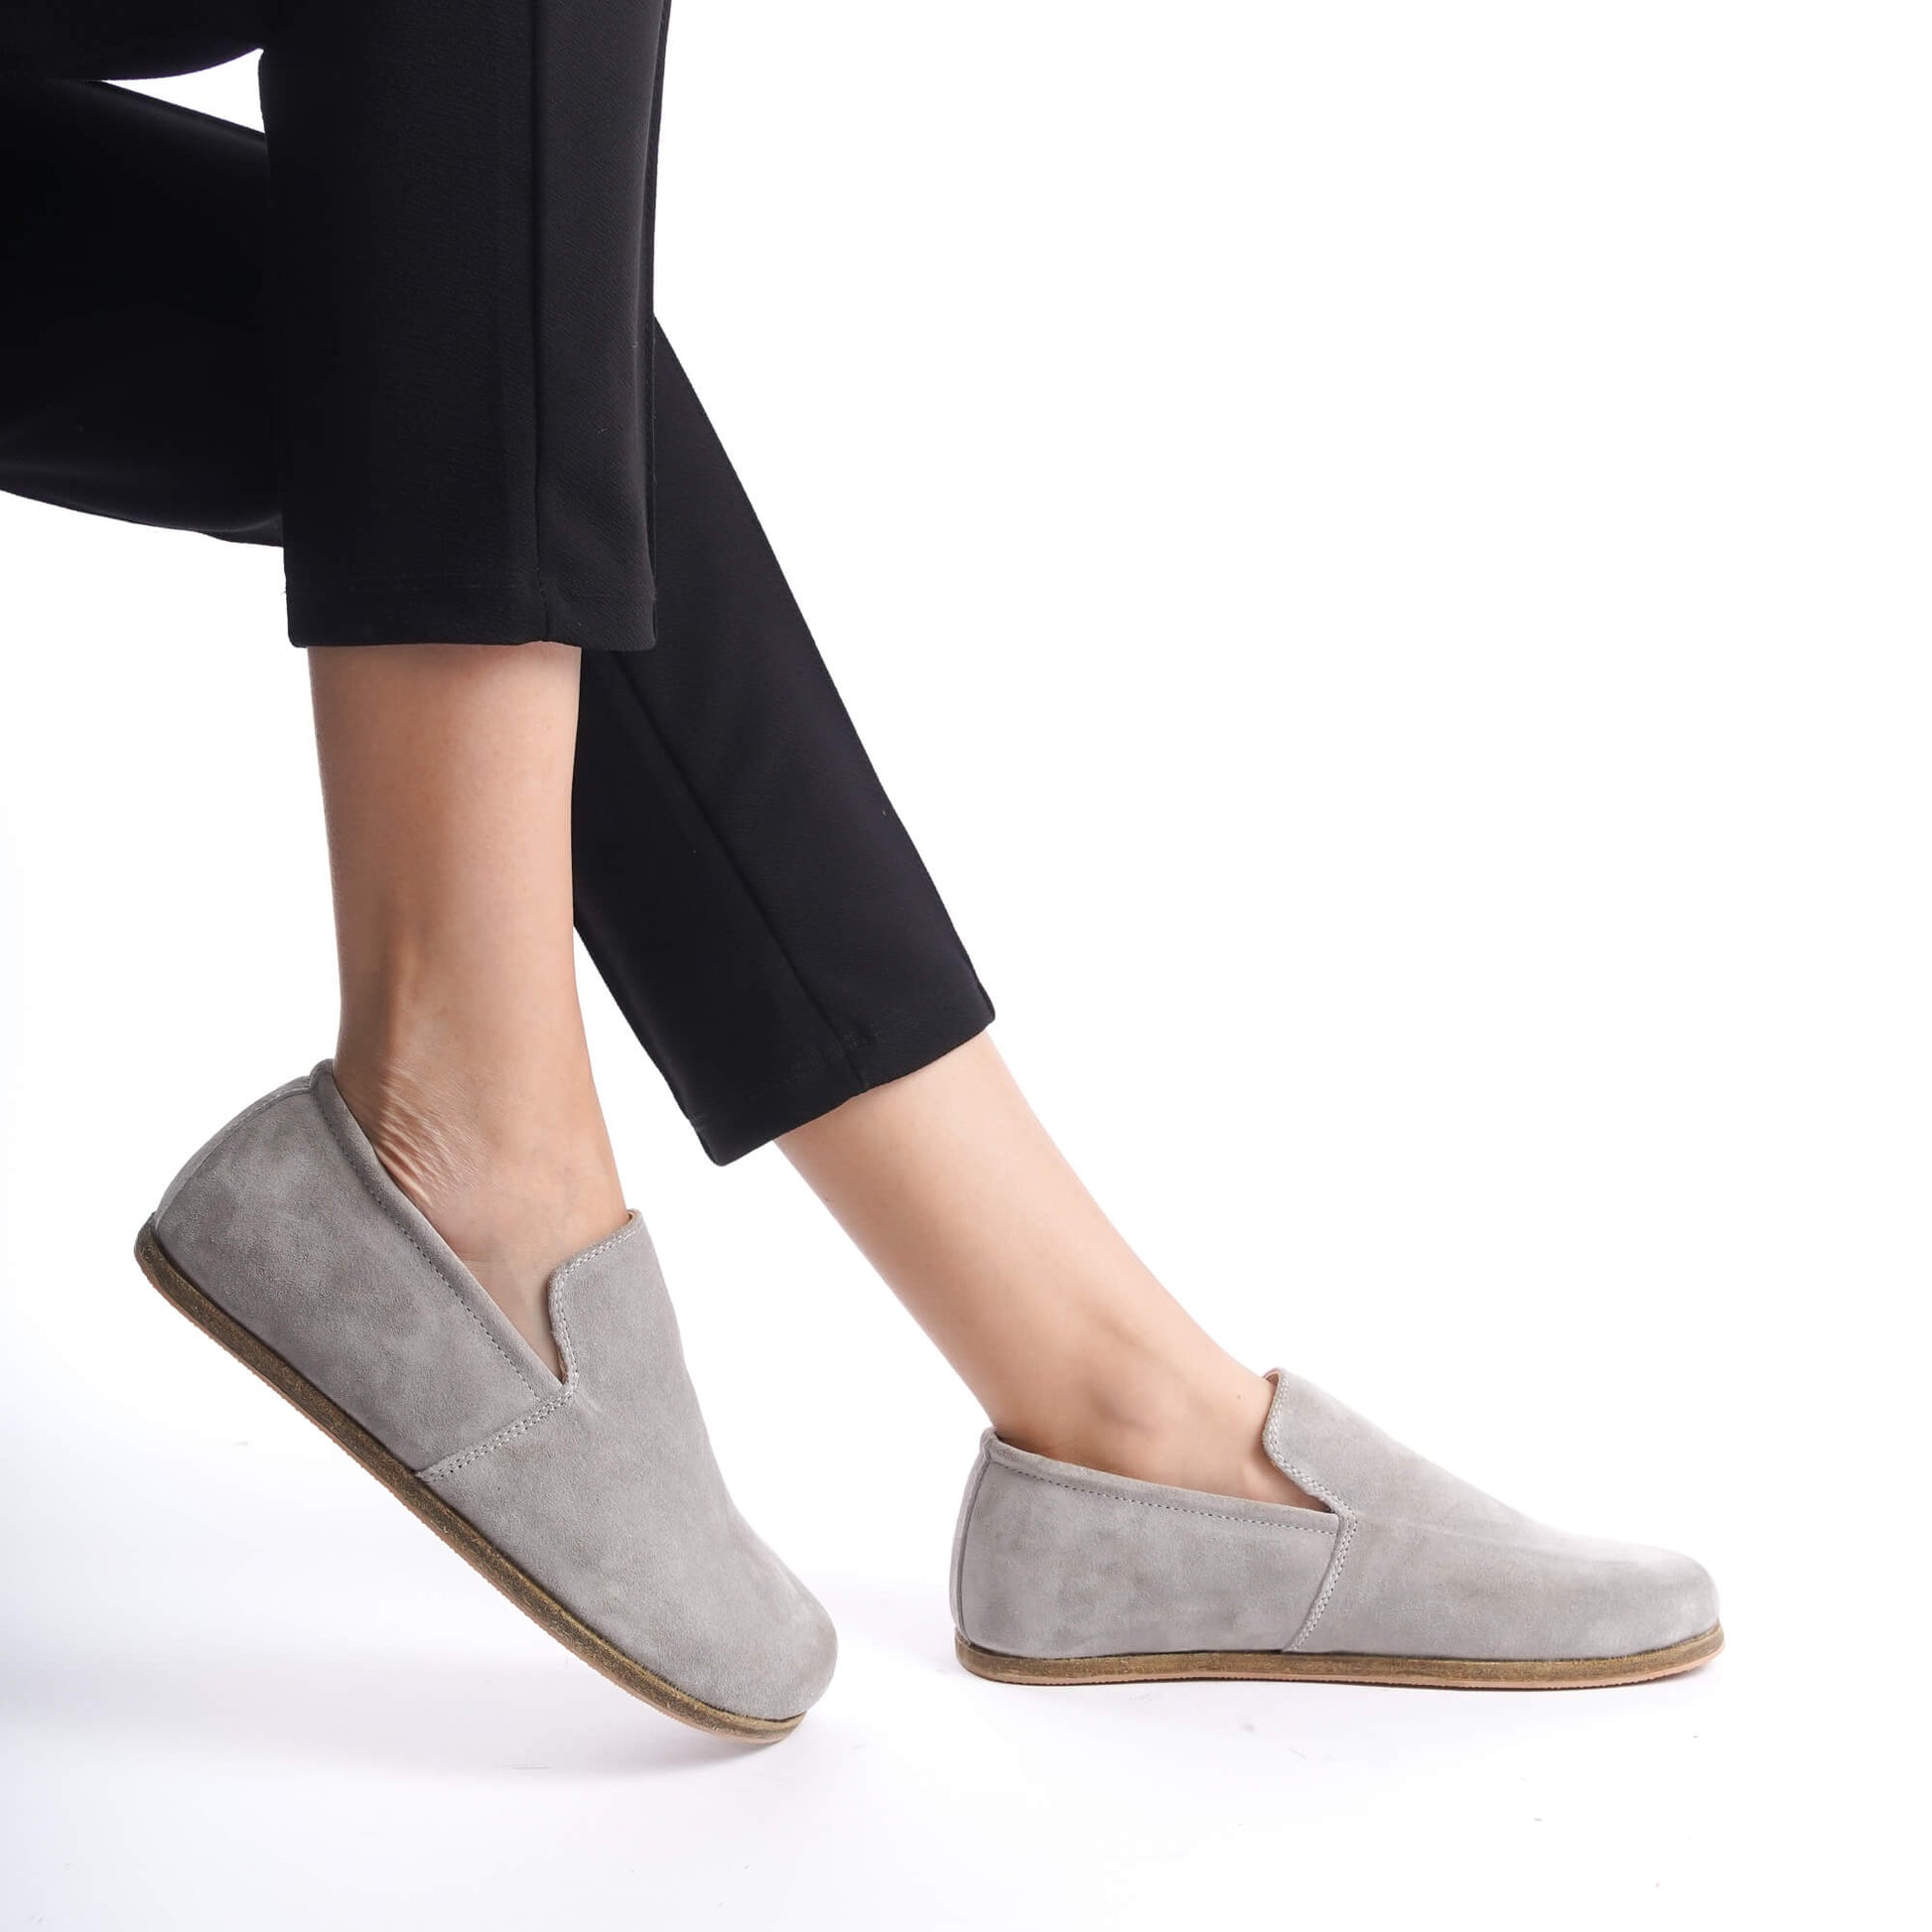 Aeolia gray suede barefoot women loafers, paired with black pants, featuring a minimalist and comfortable design.